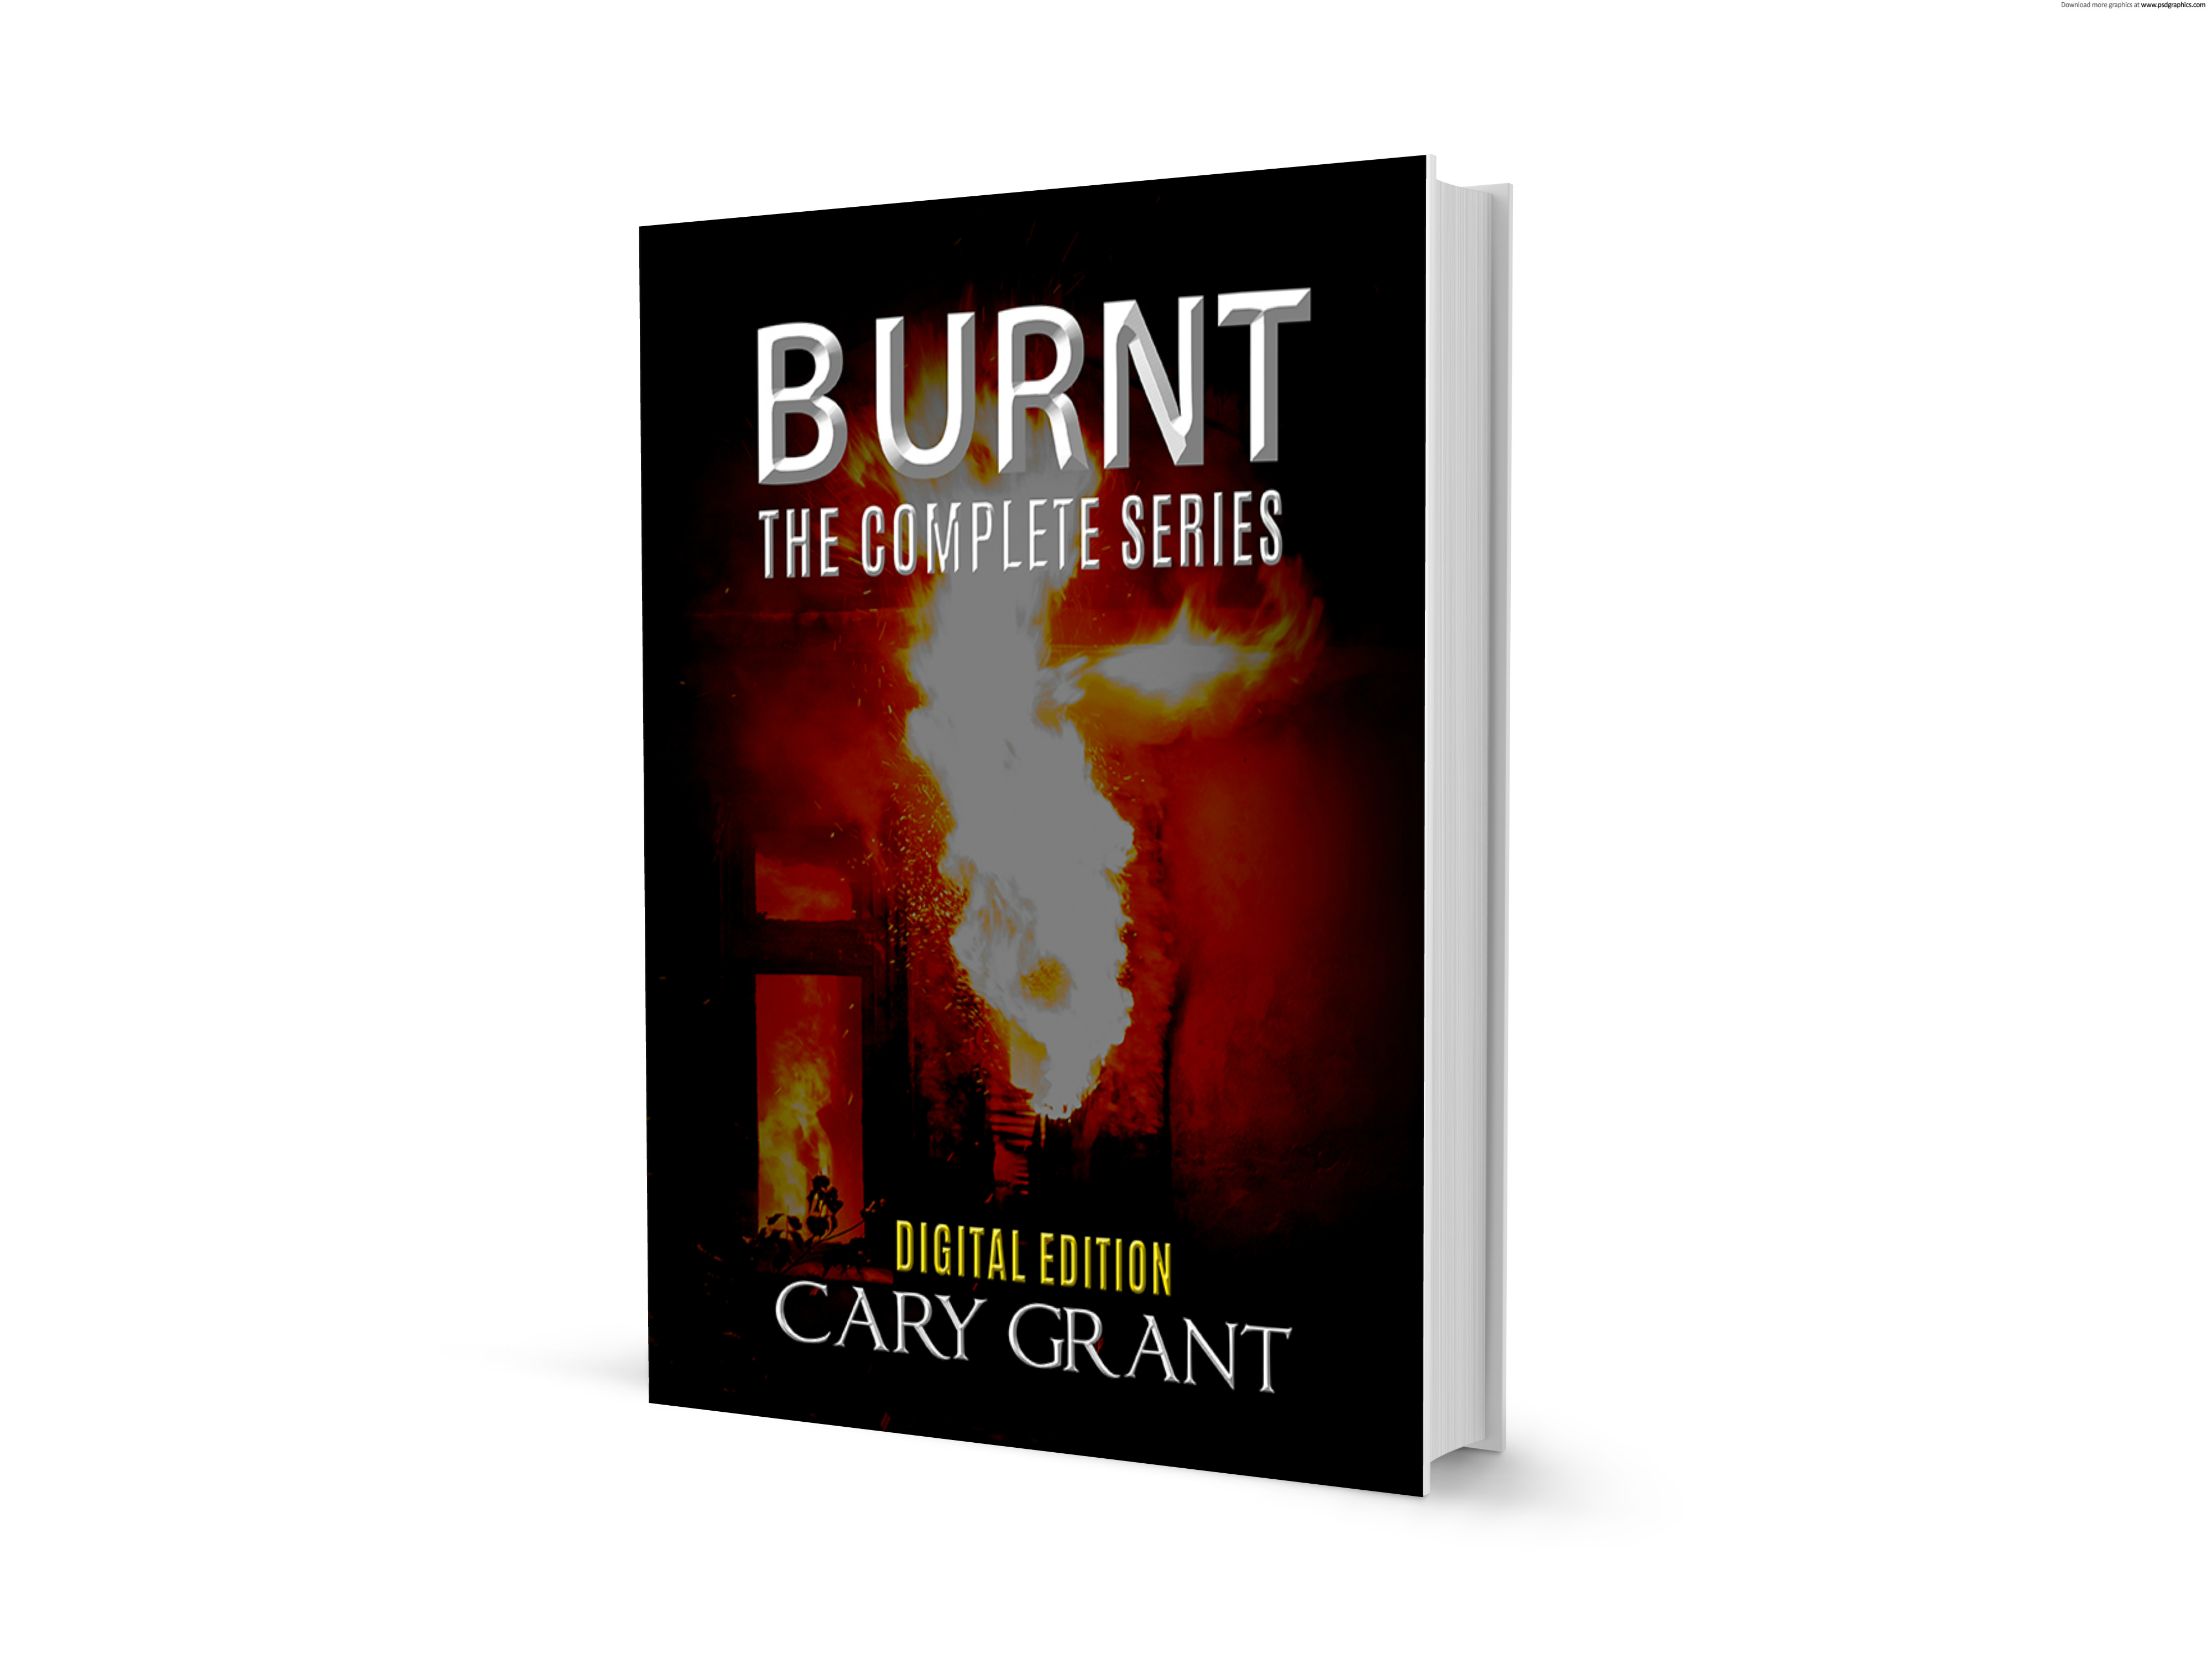 BURNT - The Complete Series